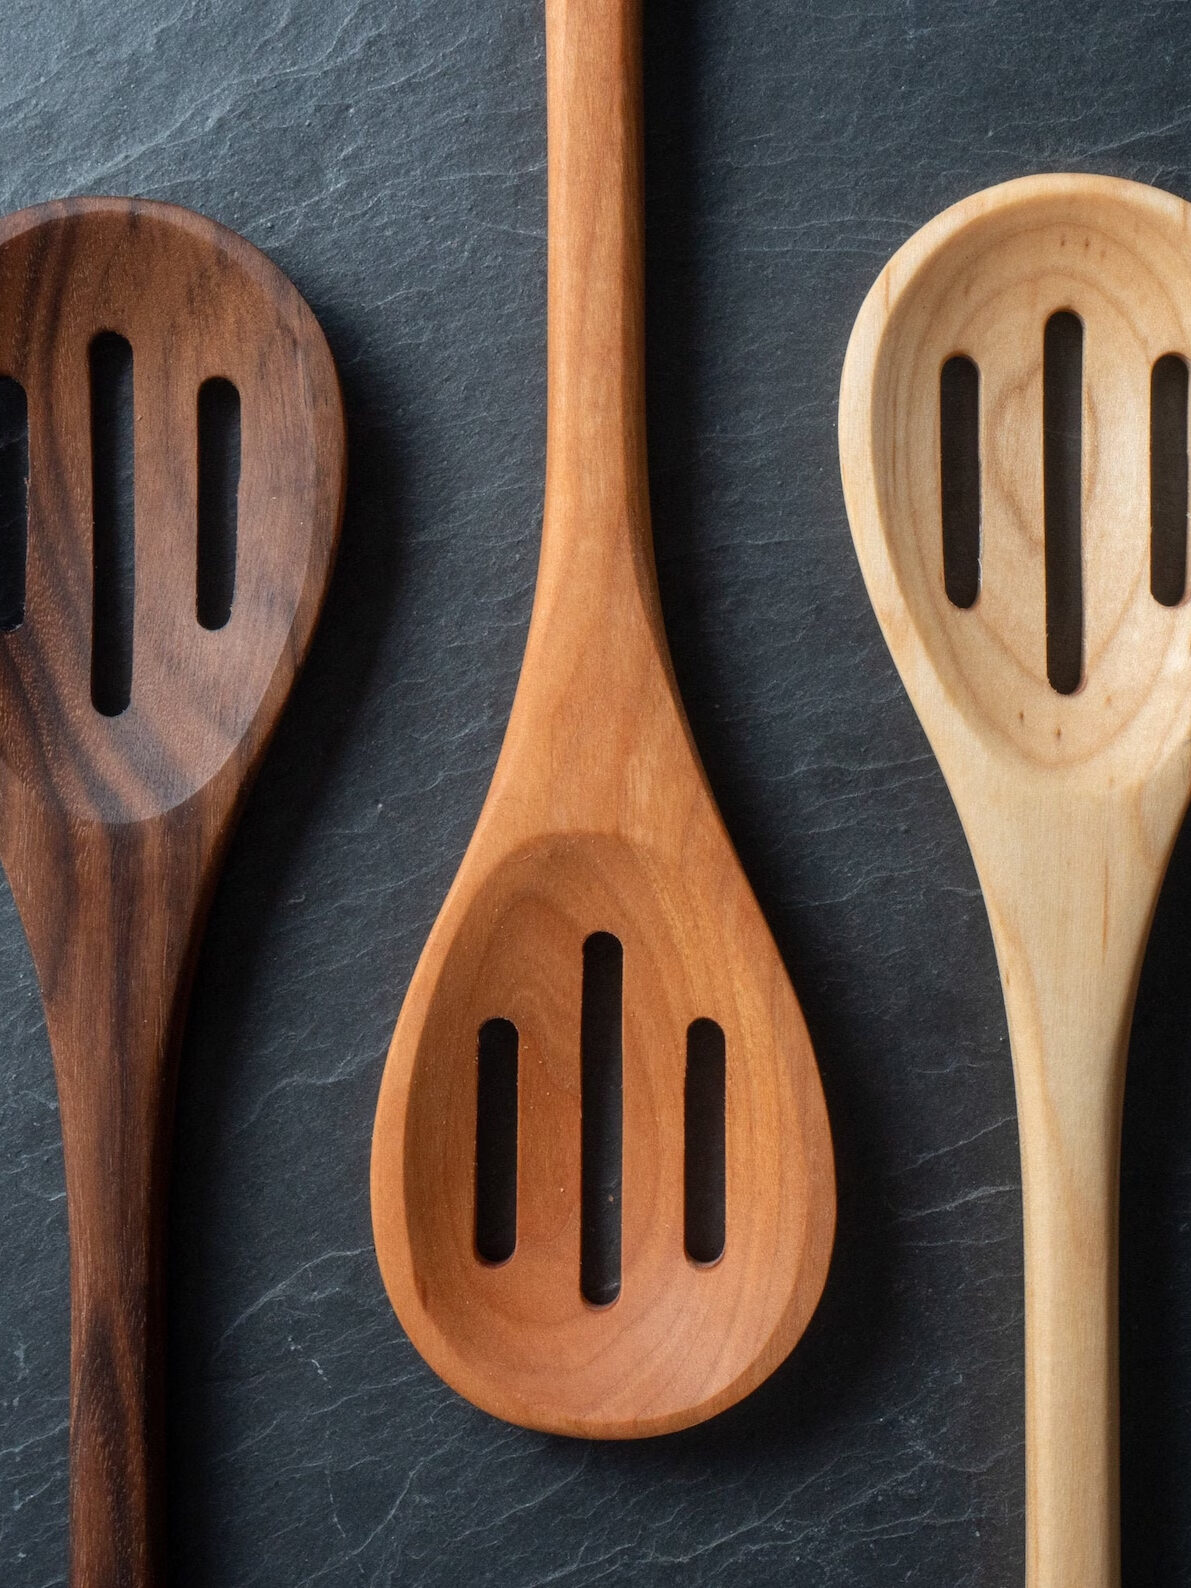 PFAS-Free Wooden Cooking Utensils from Lancaster Cast Iron